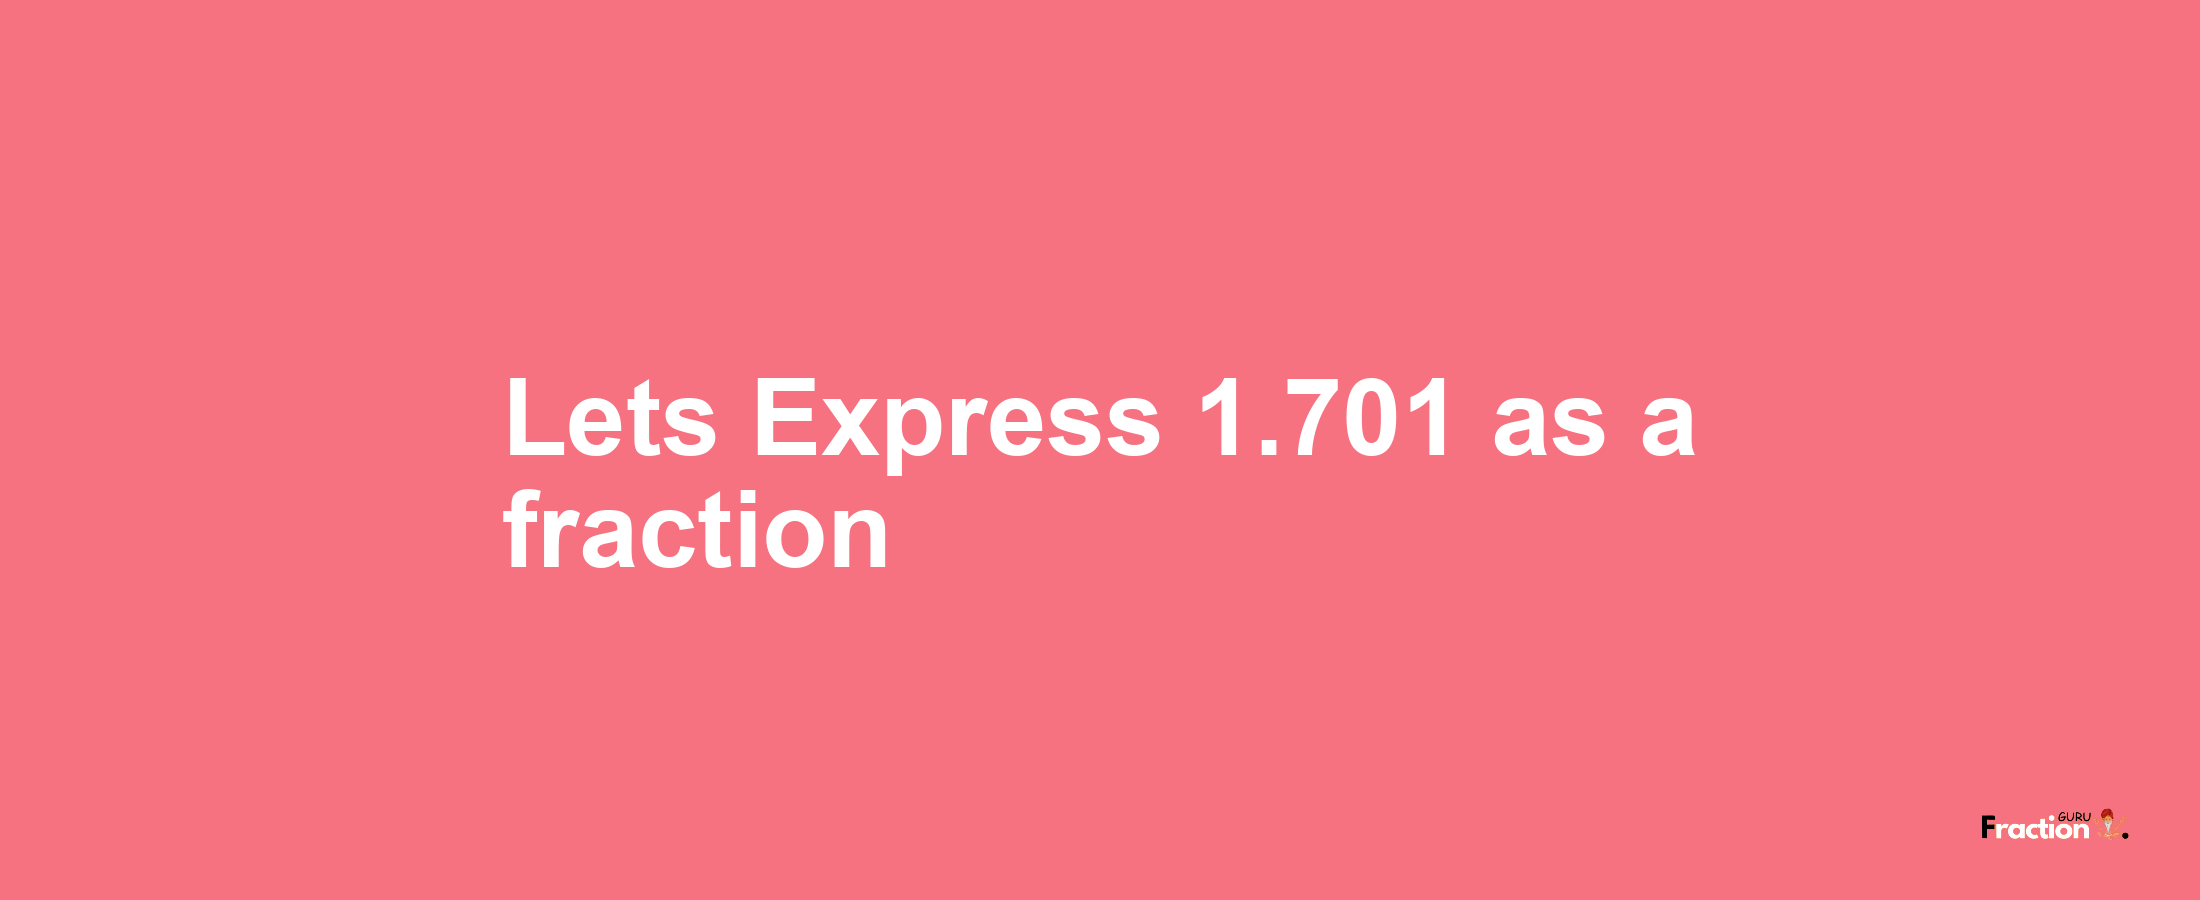 Lets Express 1.701 as afraction